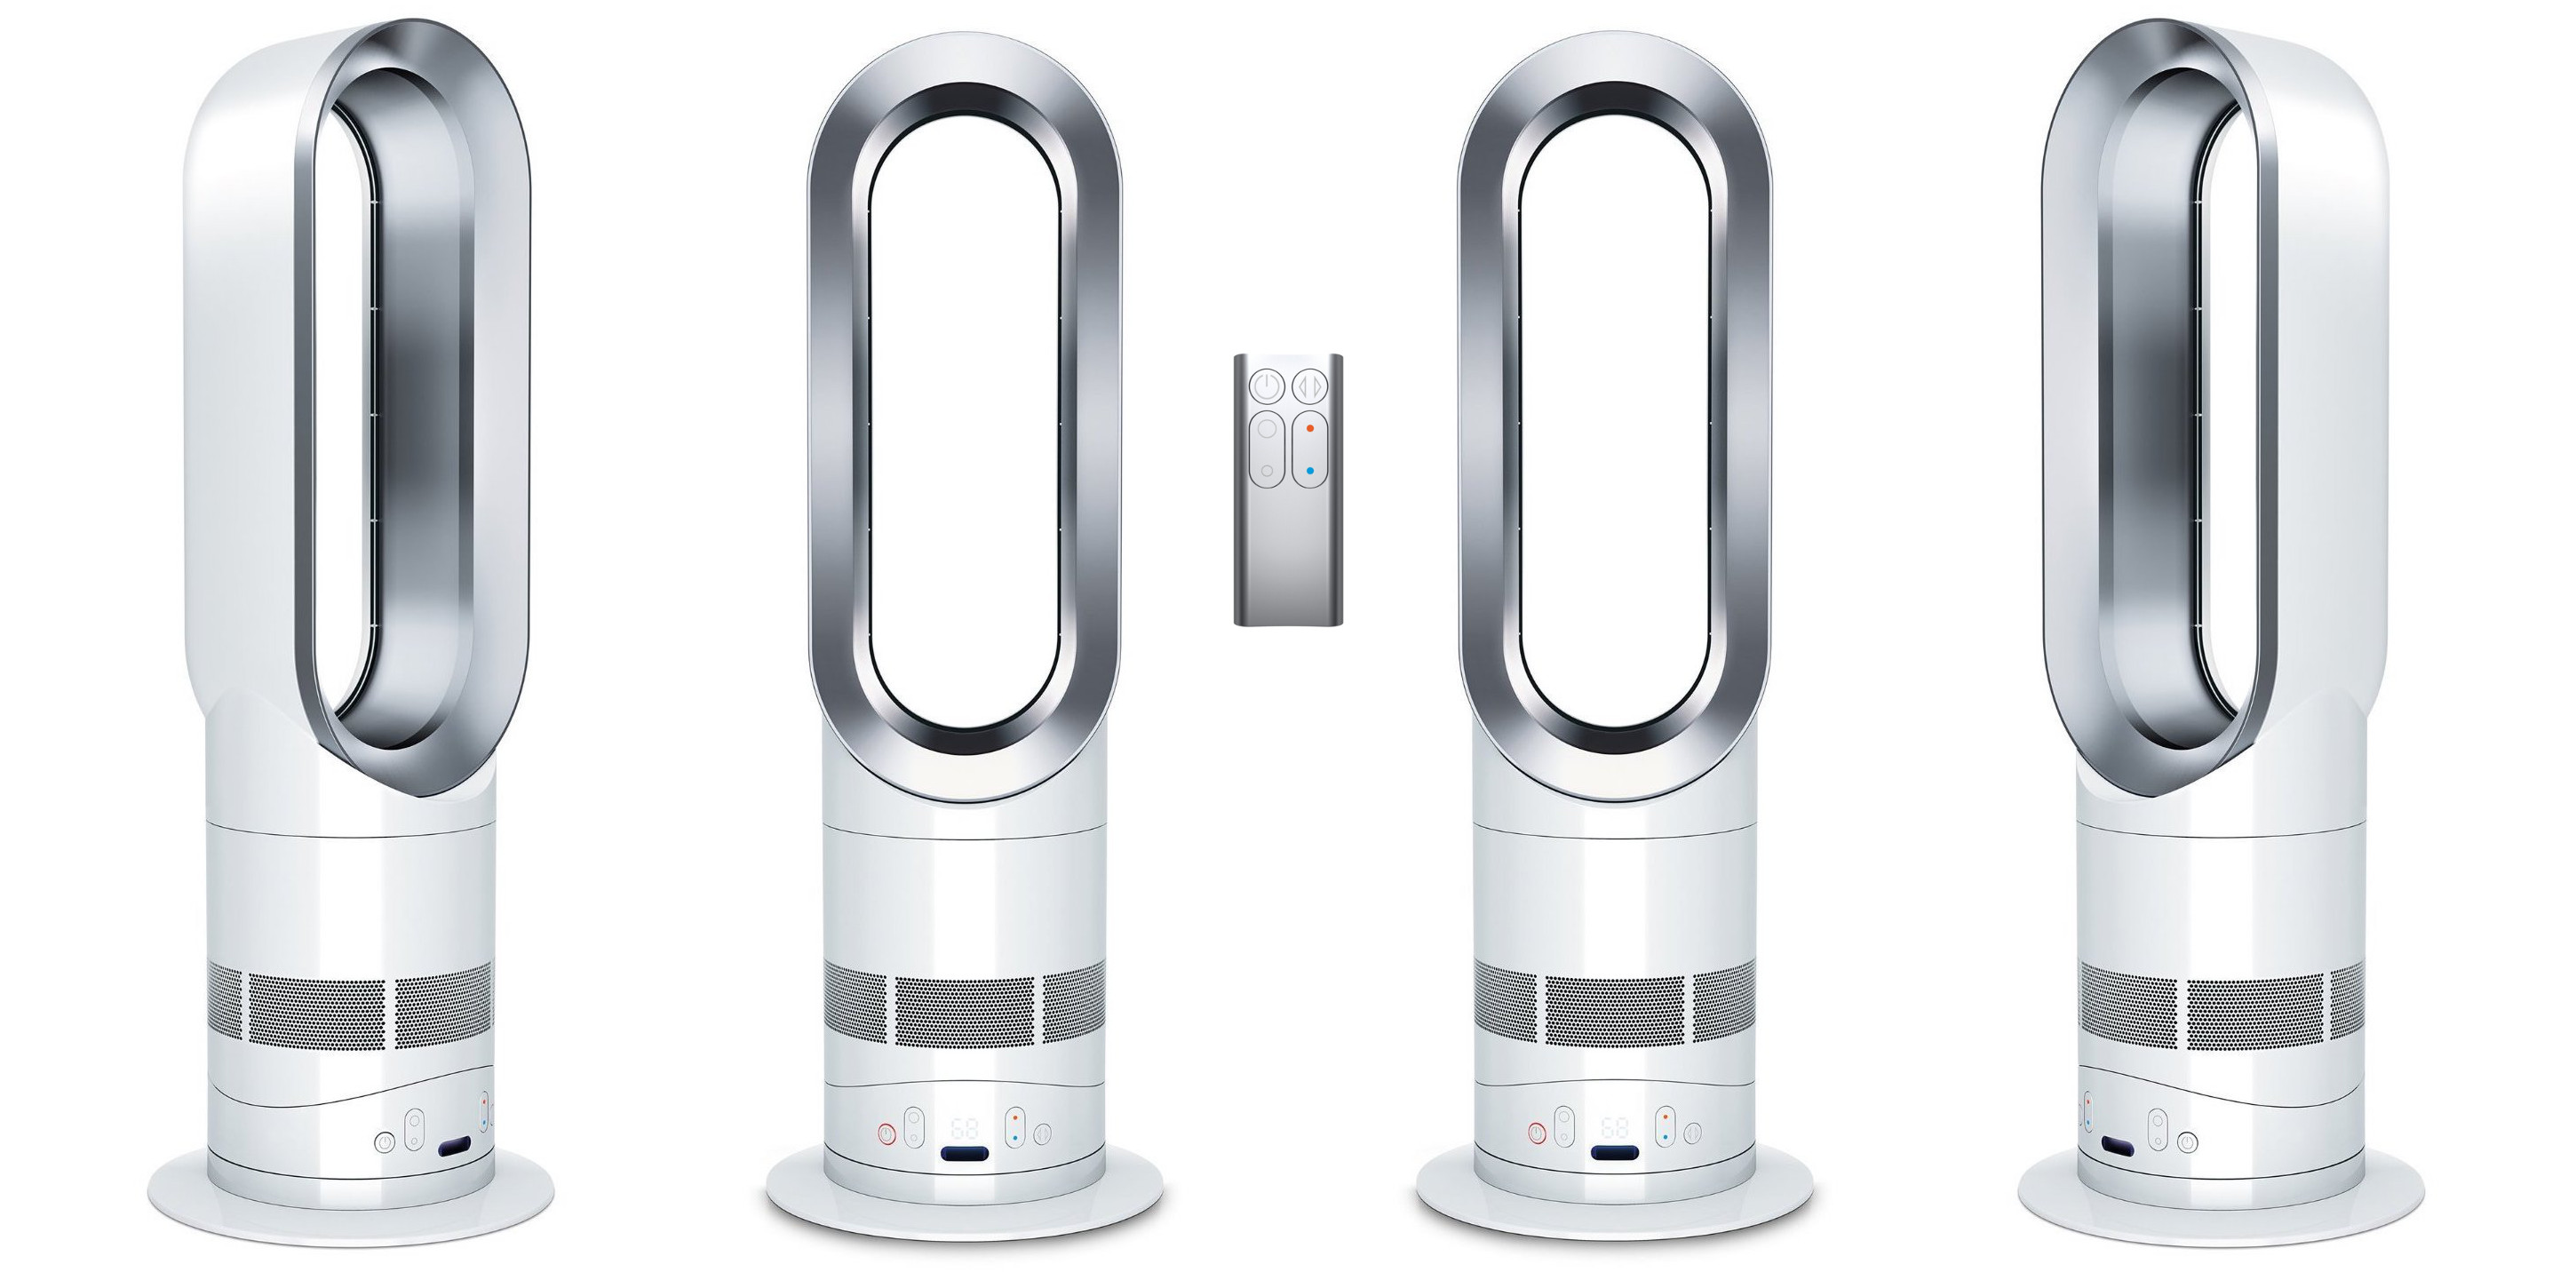 For today only, Amazon has the Dyson AM05 Hot + Cool Fan Heater in